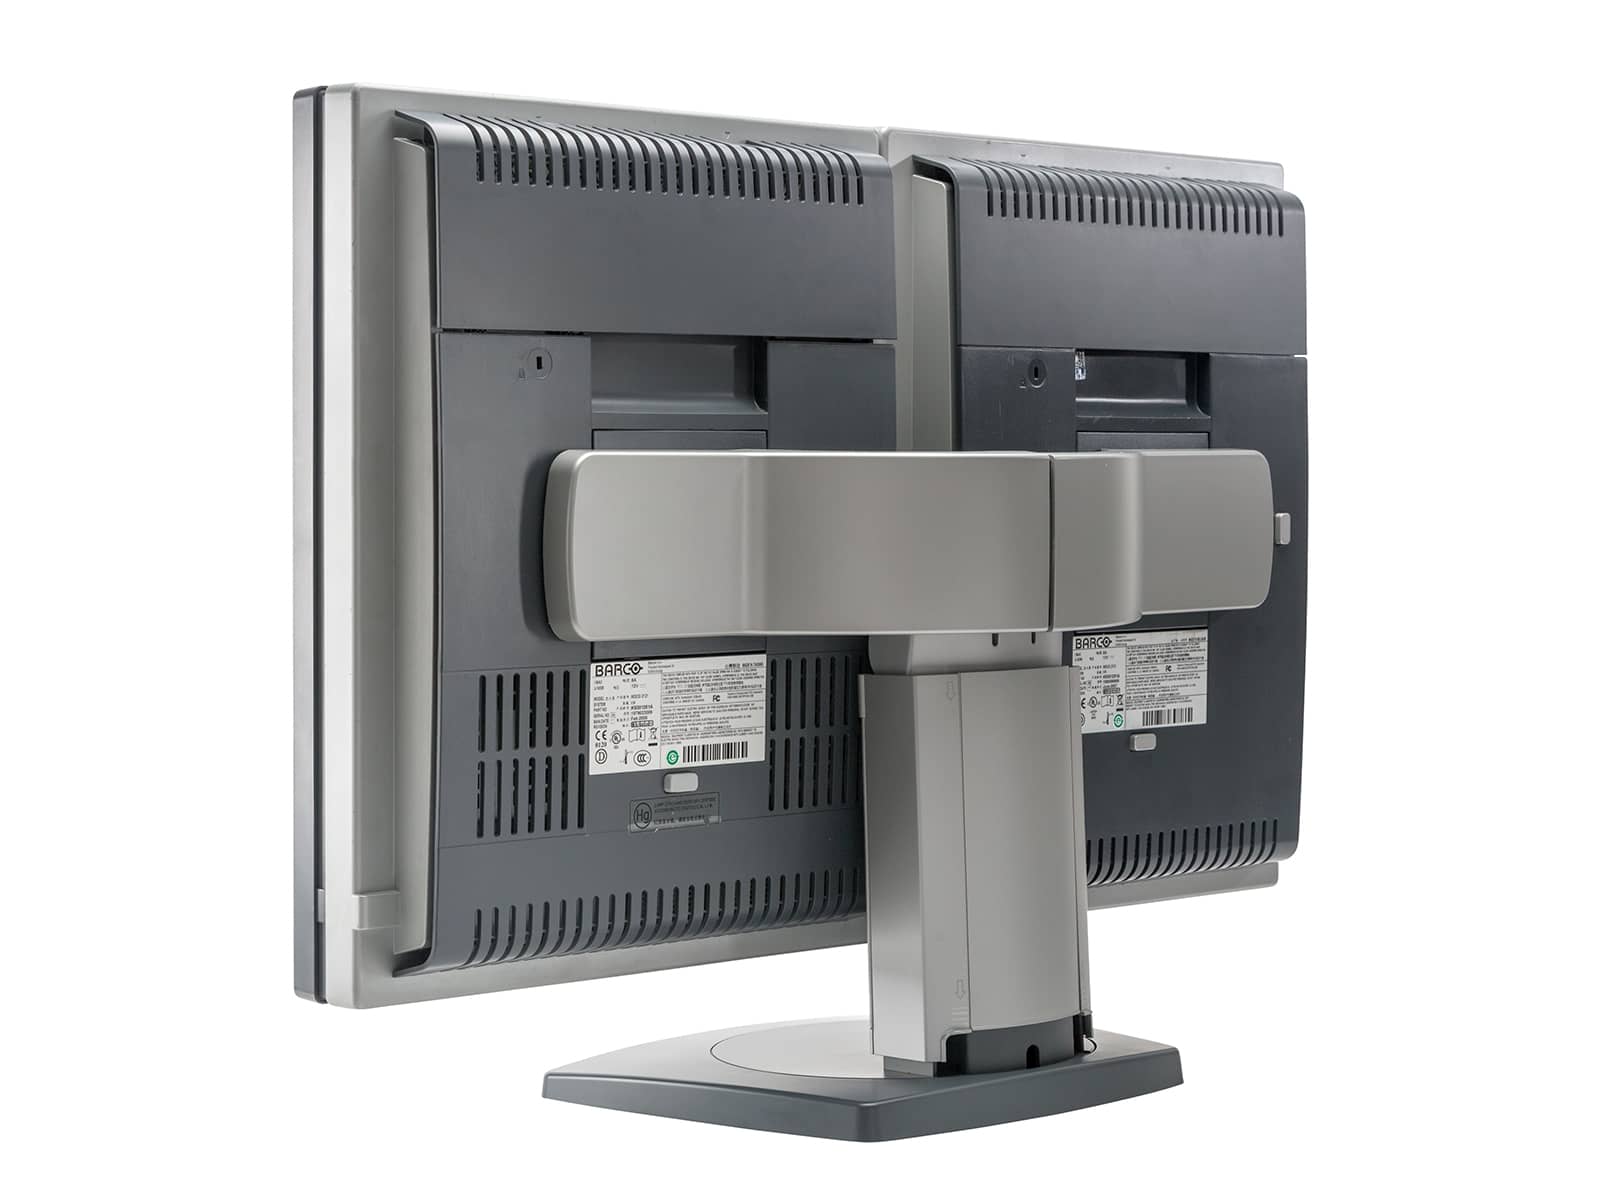 Barco Coronis MDCG-3120 3MP 20" Grayscale General Radiology Diagnostic Display Monitors.com 